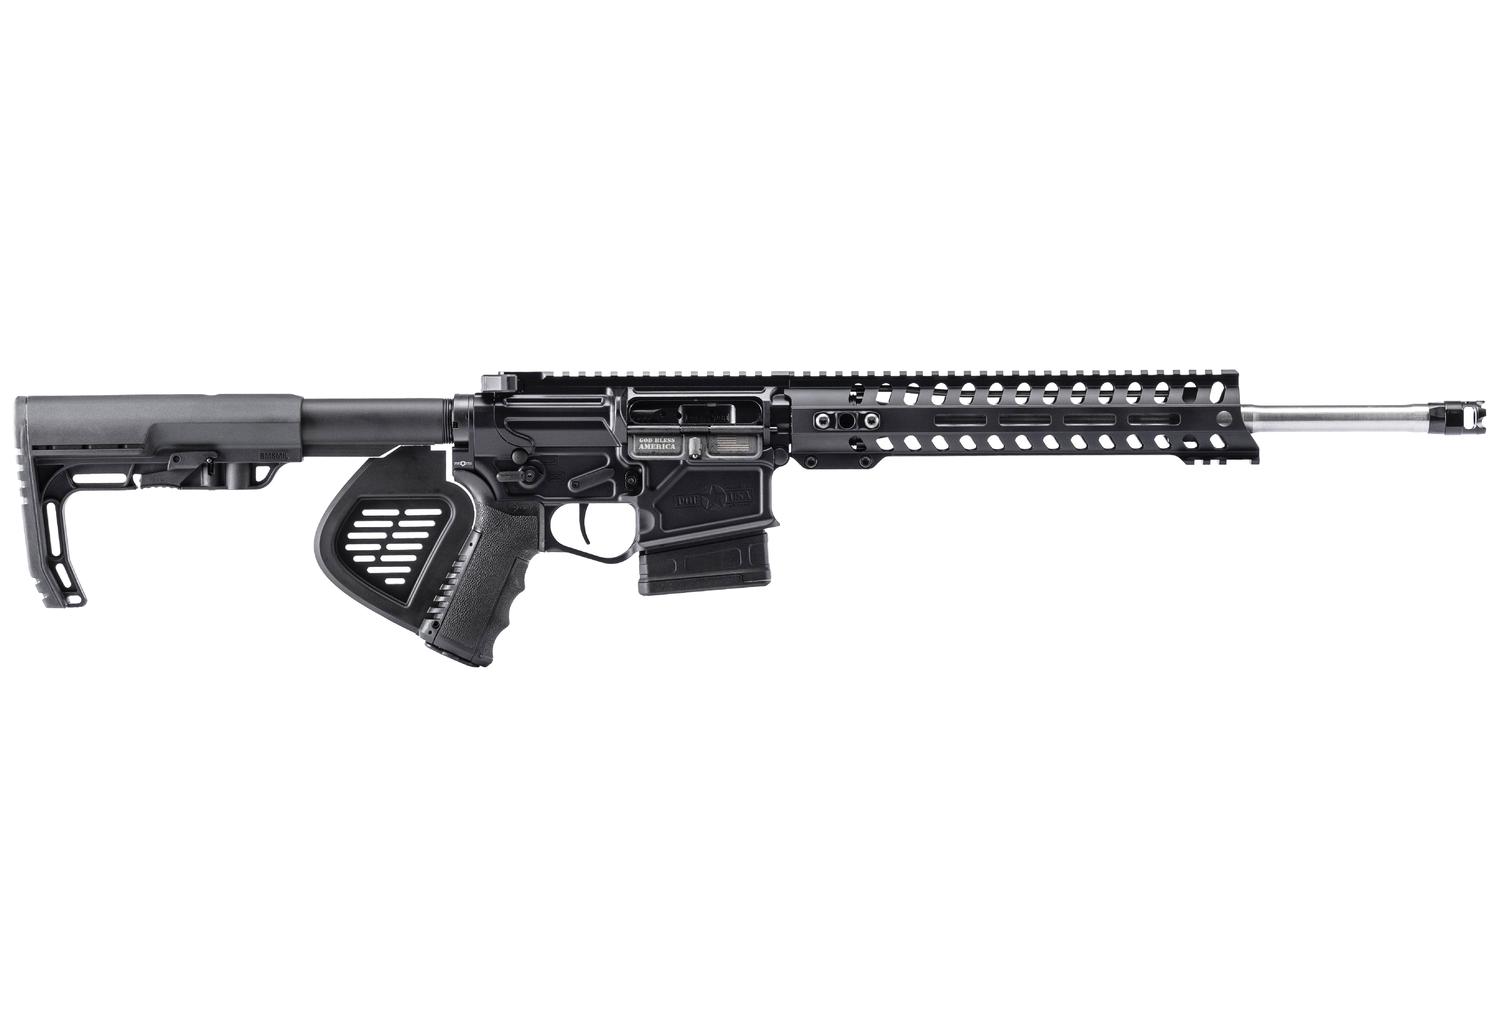  Rogue Di .308win 16.5in Stainless Featureless - Black